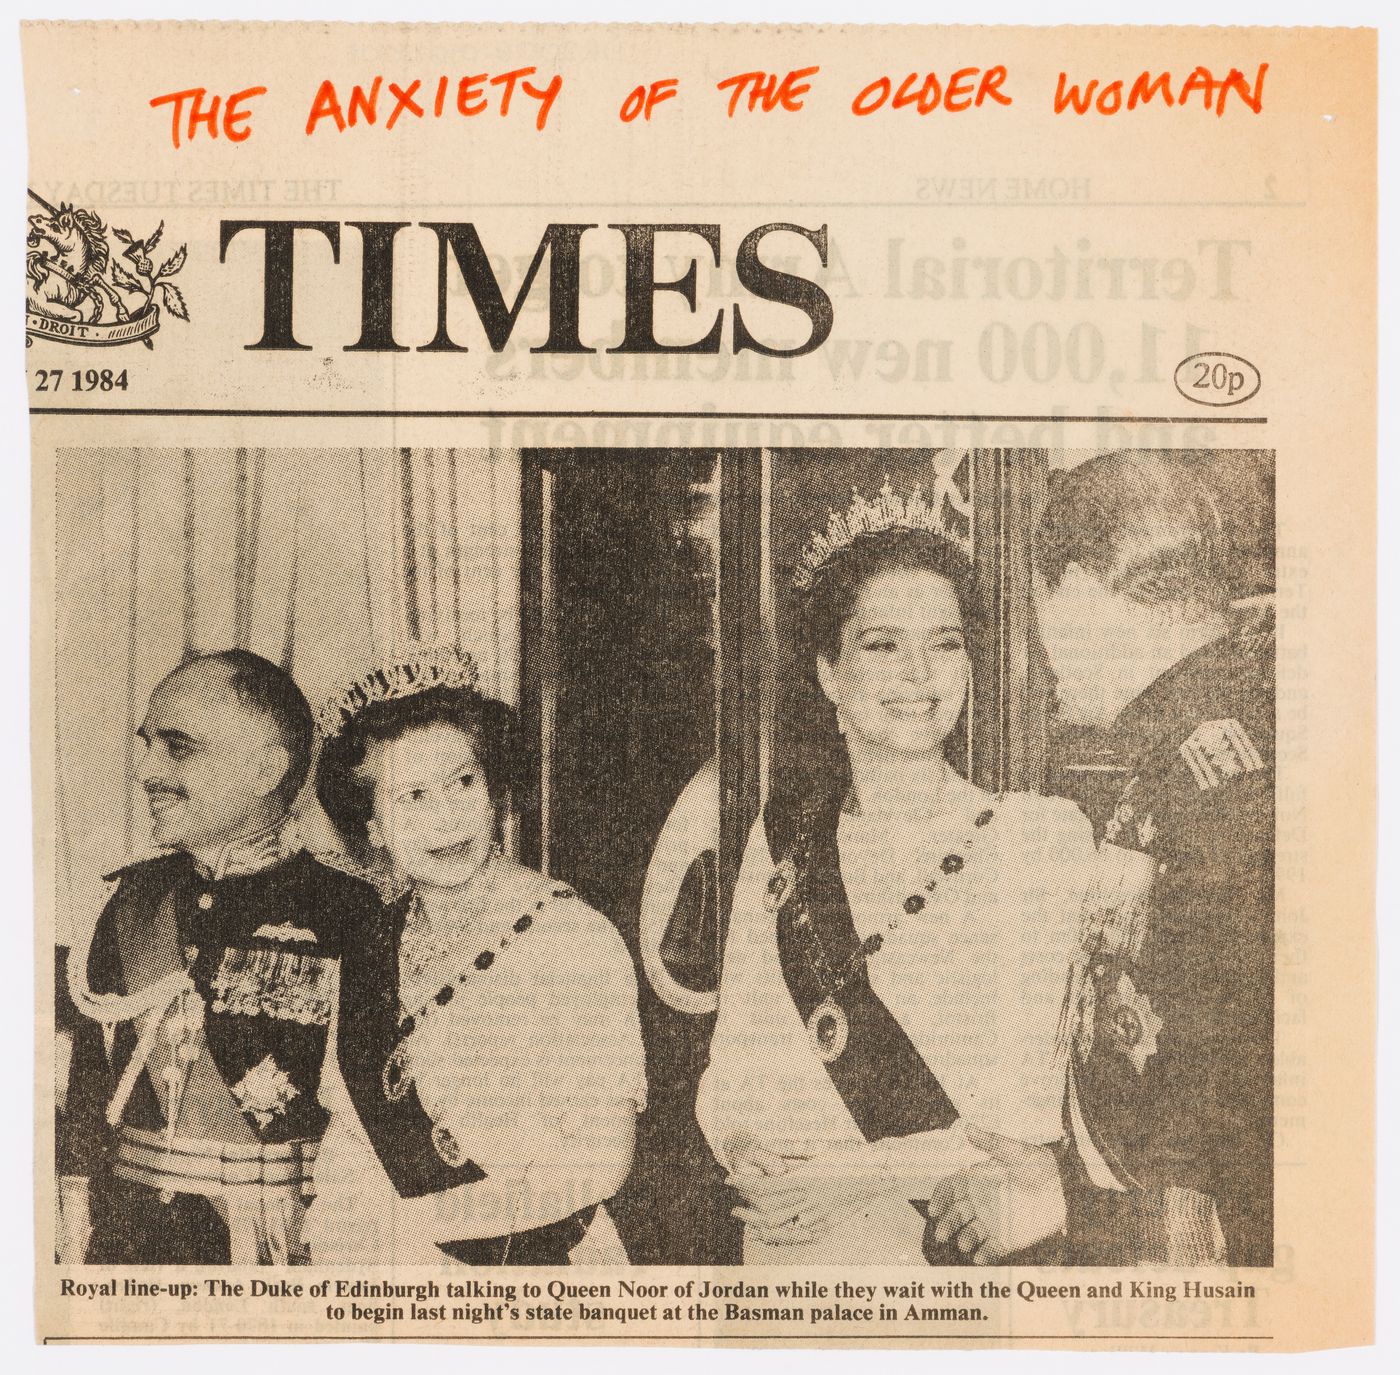 Clipping from the March 27 1984 issue of The Times (London) showing a photo of Queen Elizabeth II's visit to Amman, Jordan